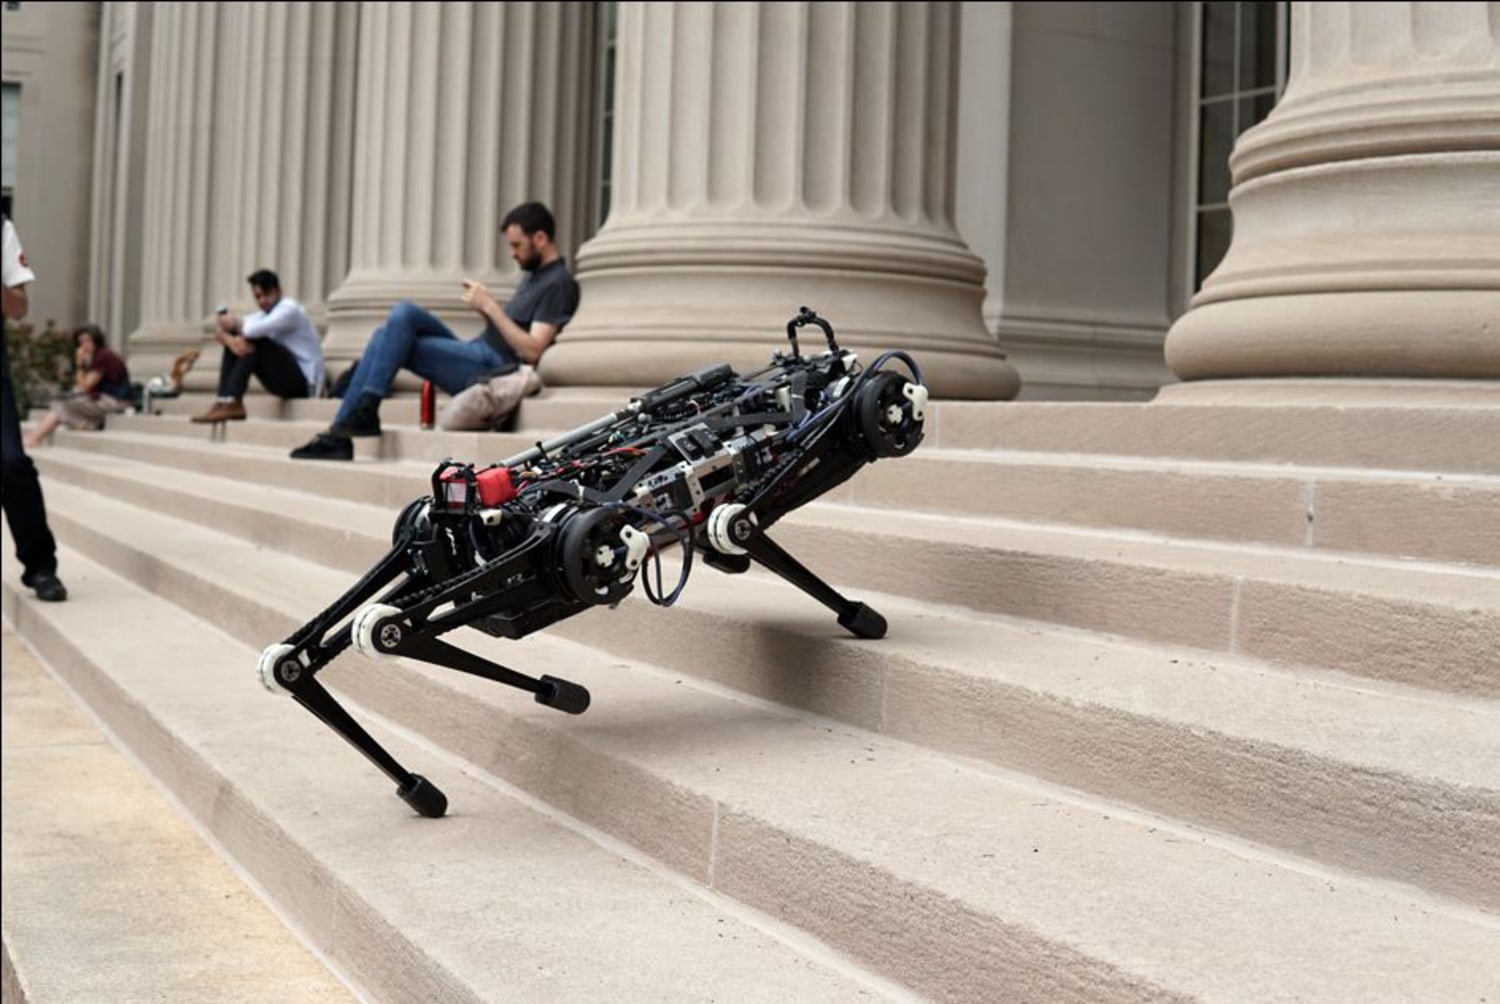 Snakebot named ground rescue robot of the year